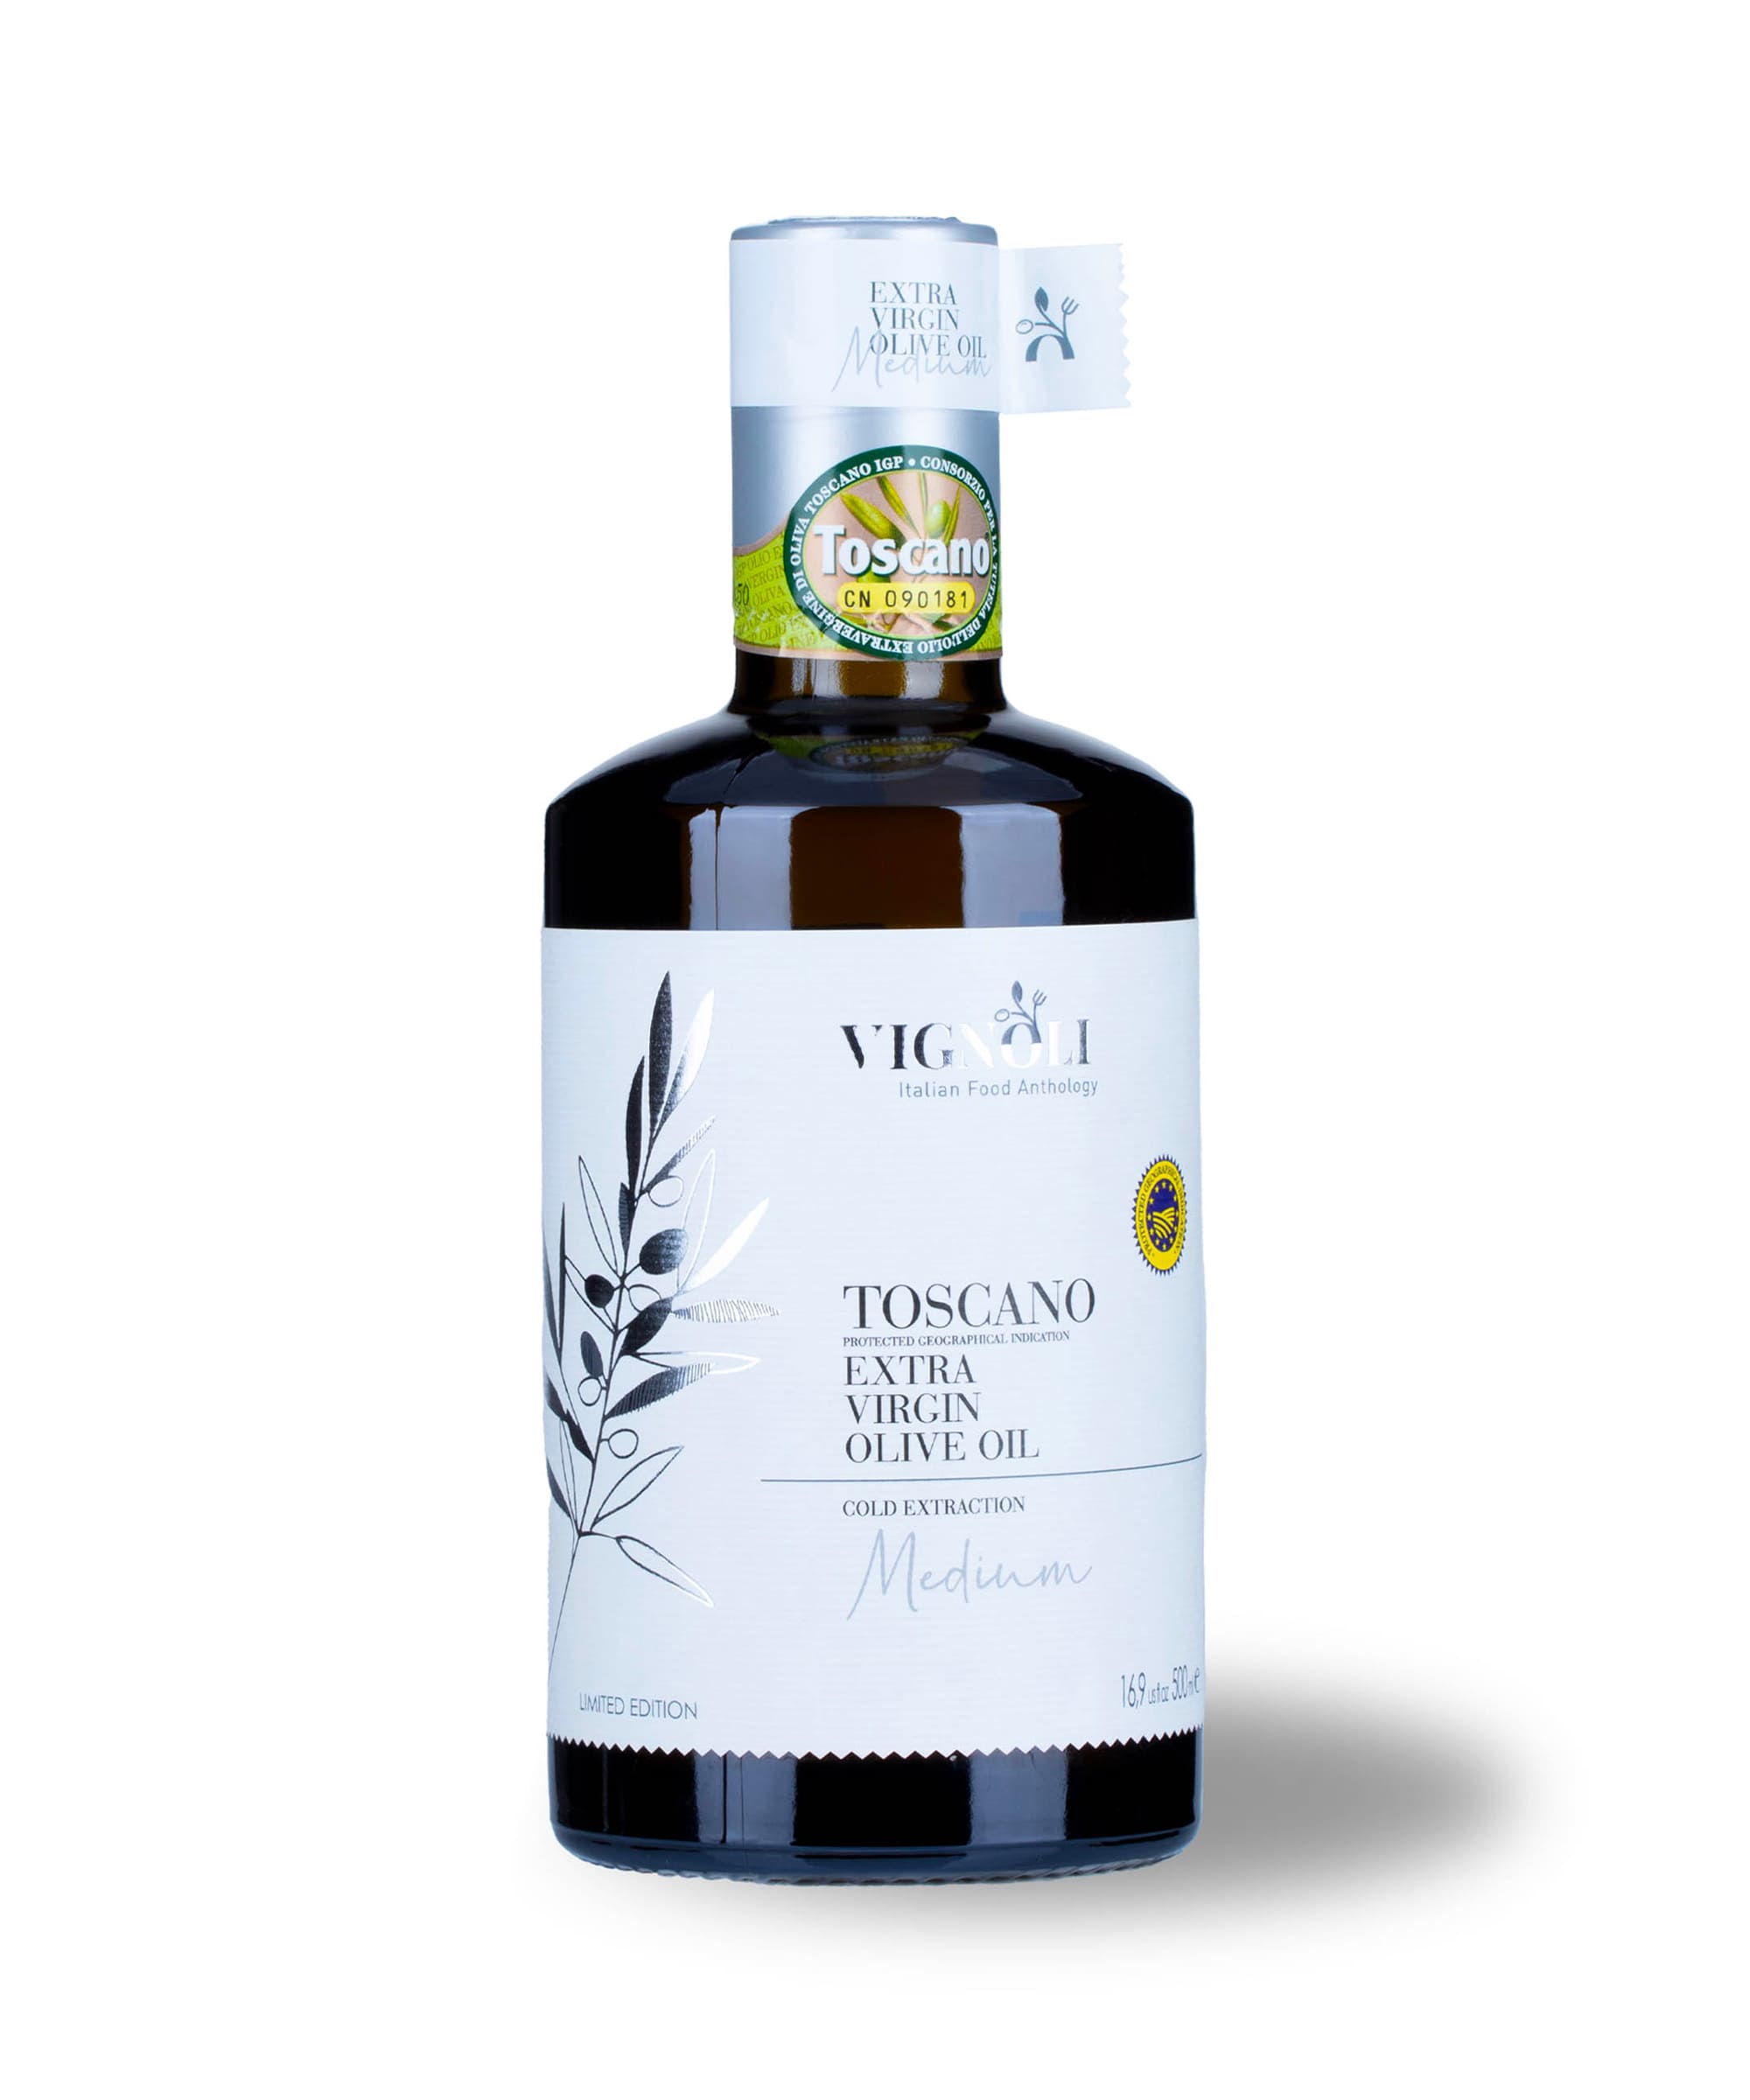  Pure Extra Virgin Olive Oil (25.4 Oz 750 ml) - Virgin Olive  Oil - Aceite de Oliva Extra Virgen, Premium, EVOO - Victor Guedes El  Gallo,Tradition Since 1919 by Serendipity